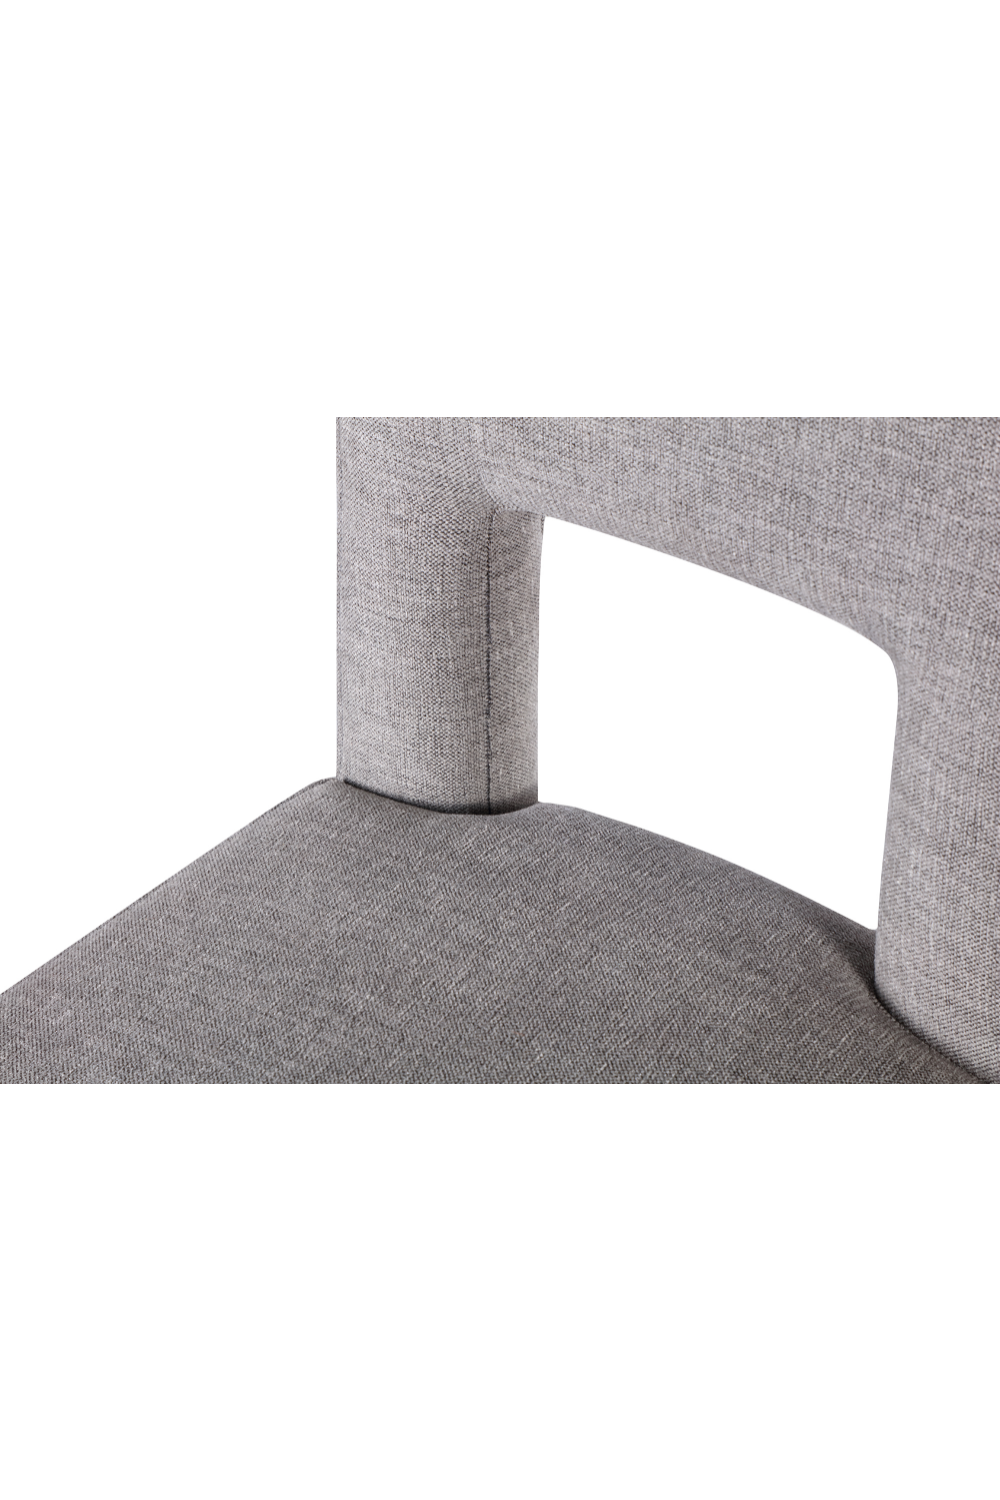 Gray Linen Upholstred Dining Chair | Liang and Eimil Venice | OROA